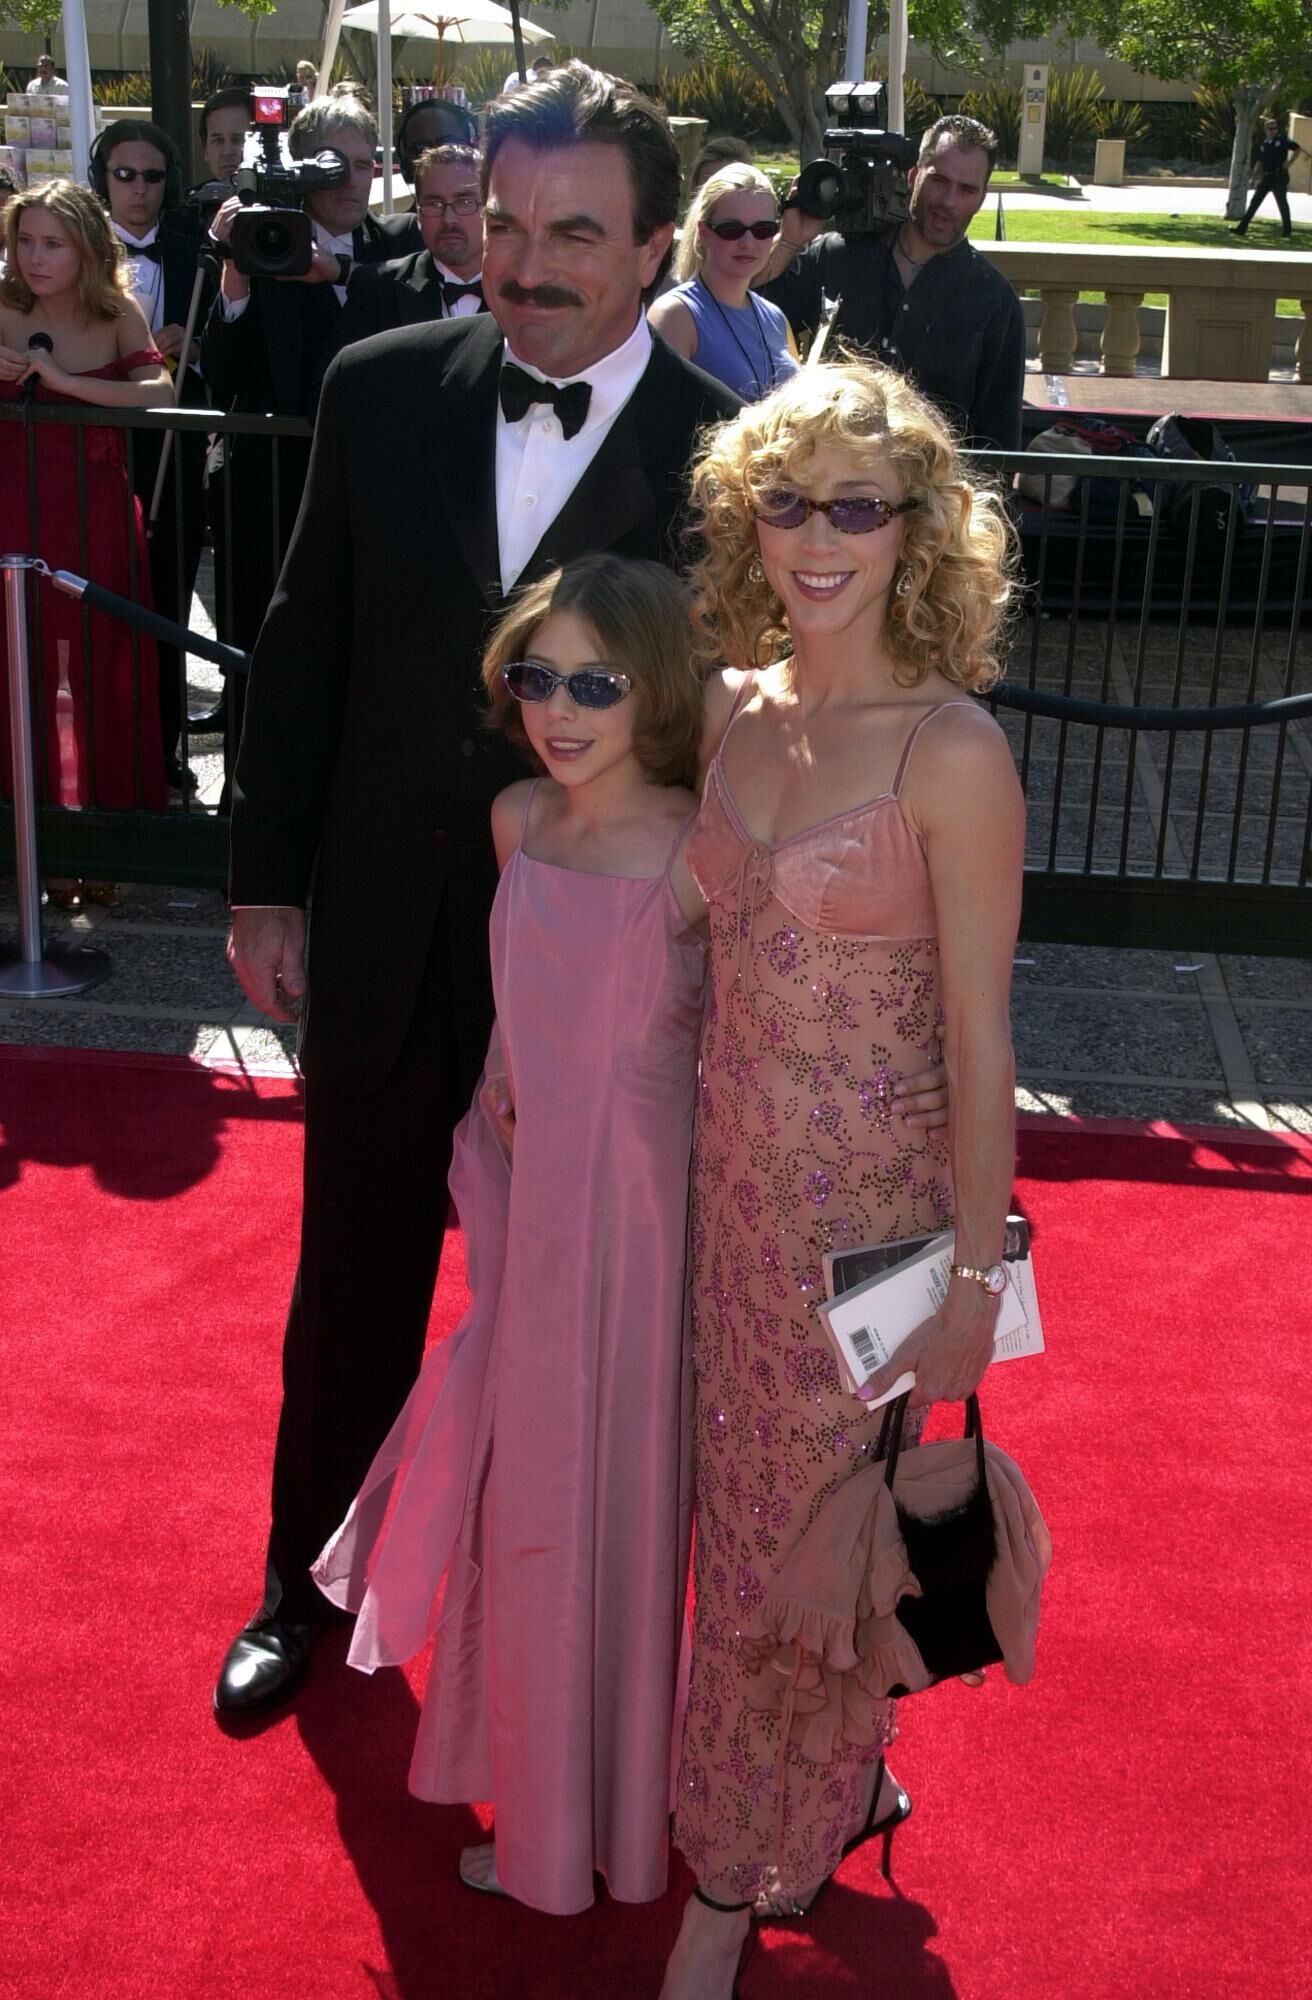  Tom Selleck and family arrive August 26, 2000 at the Creative Emmy Awards held at the Pasadena Civic Center  | Getty Images